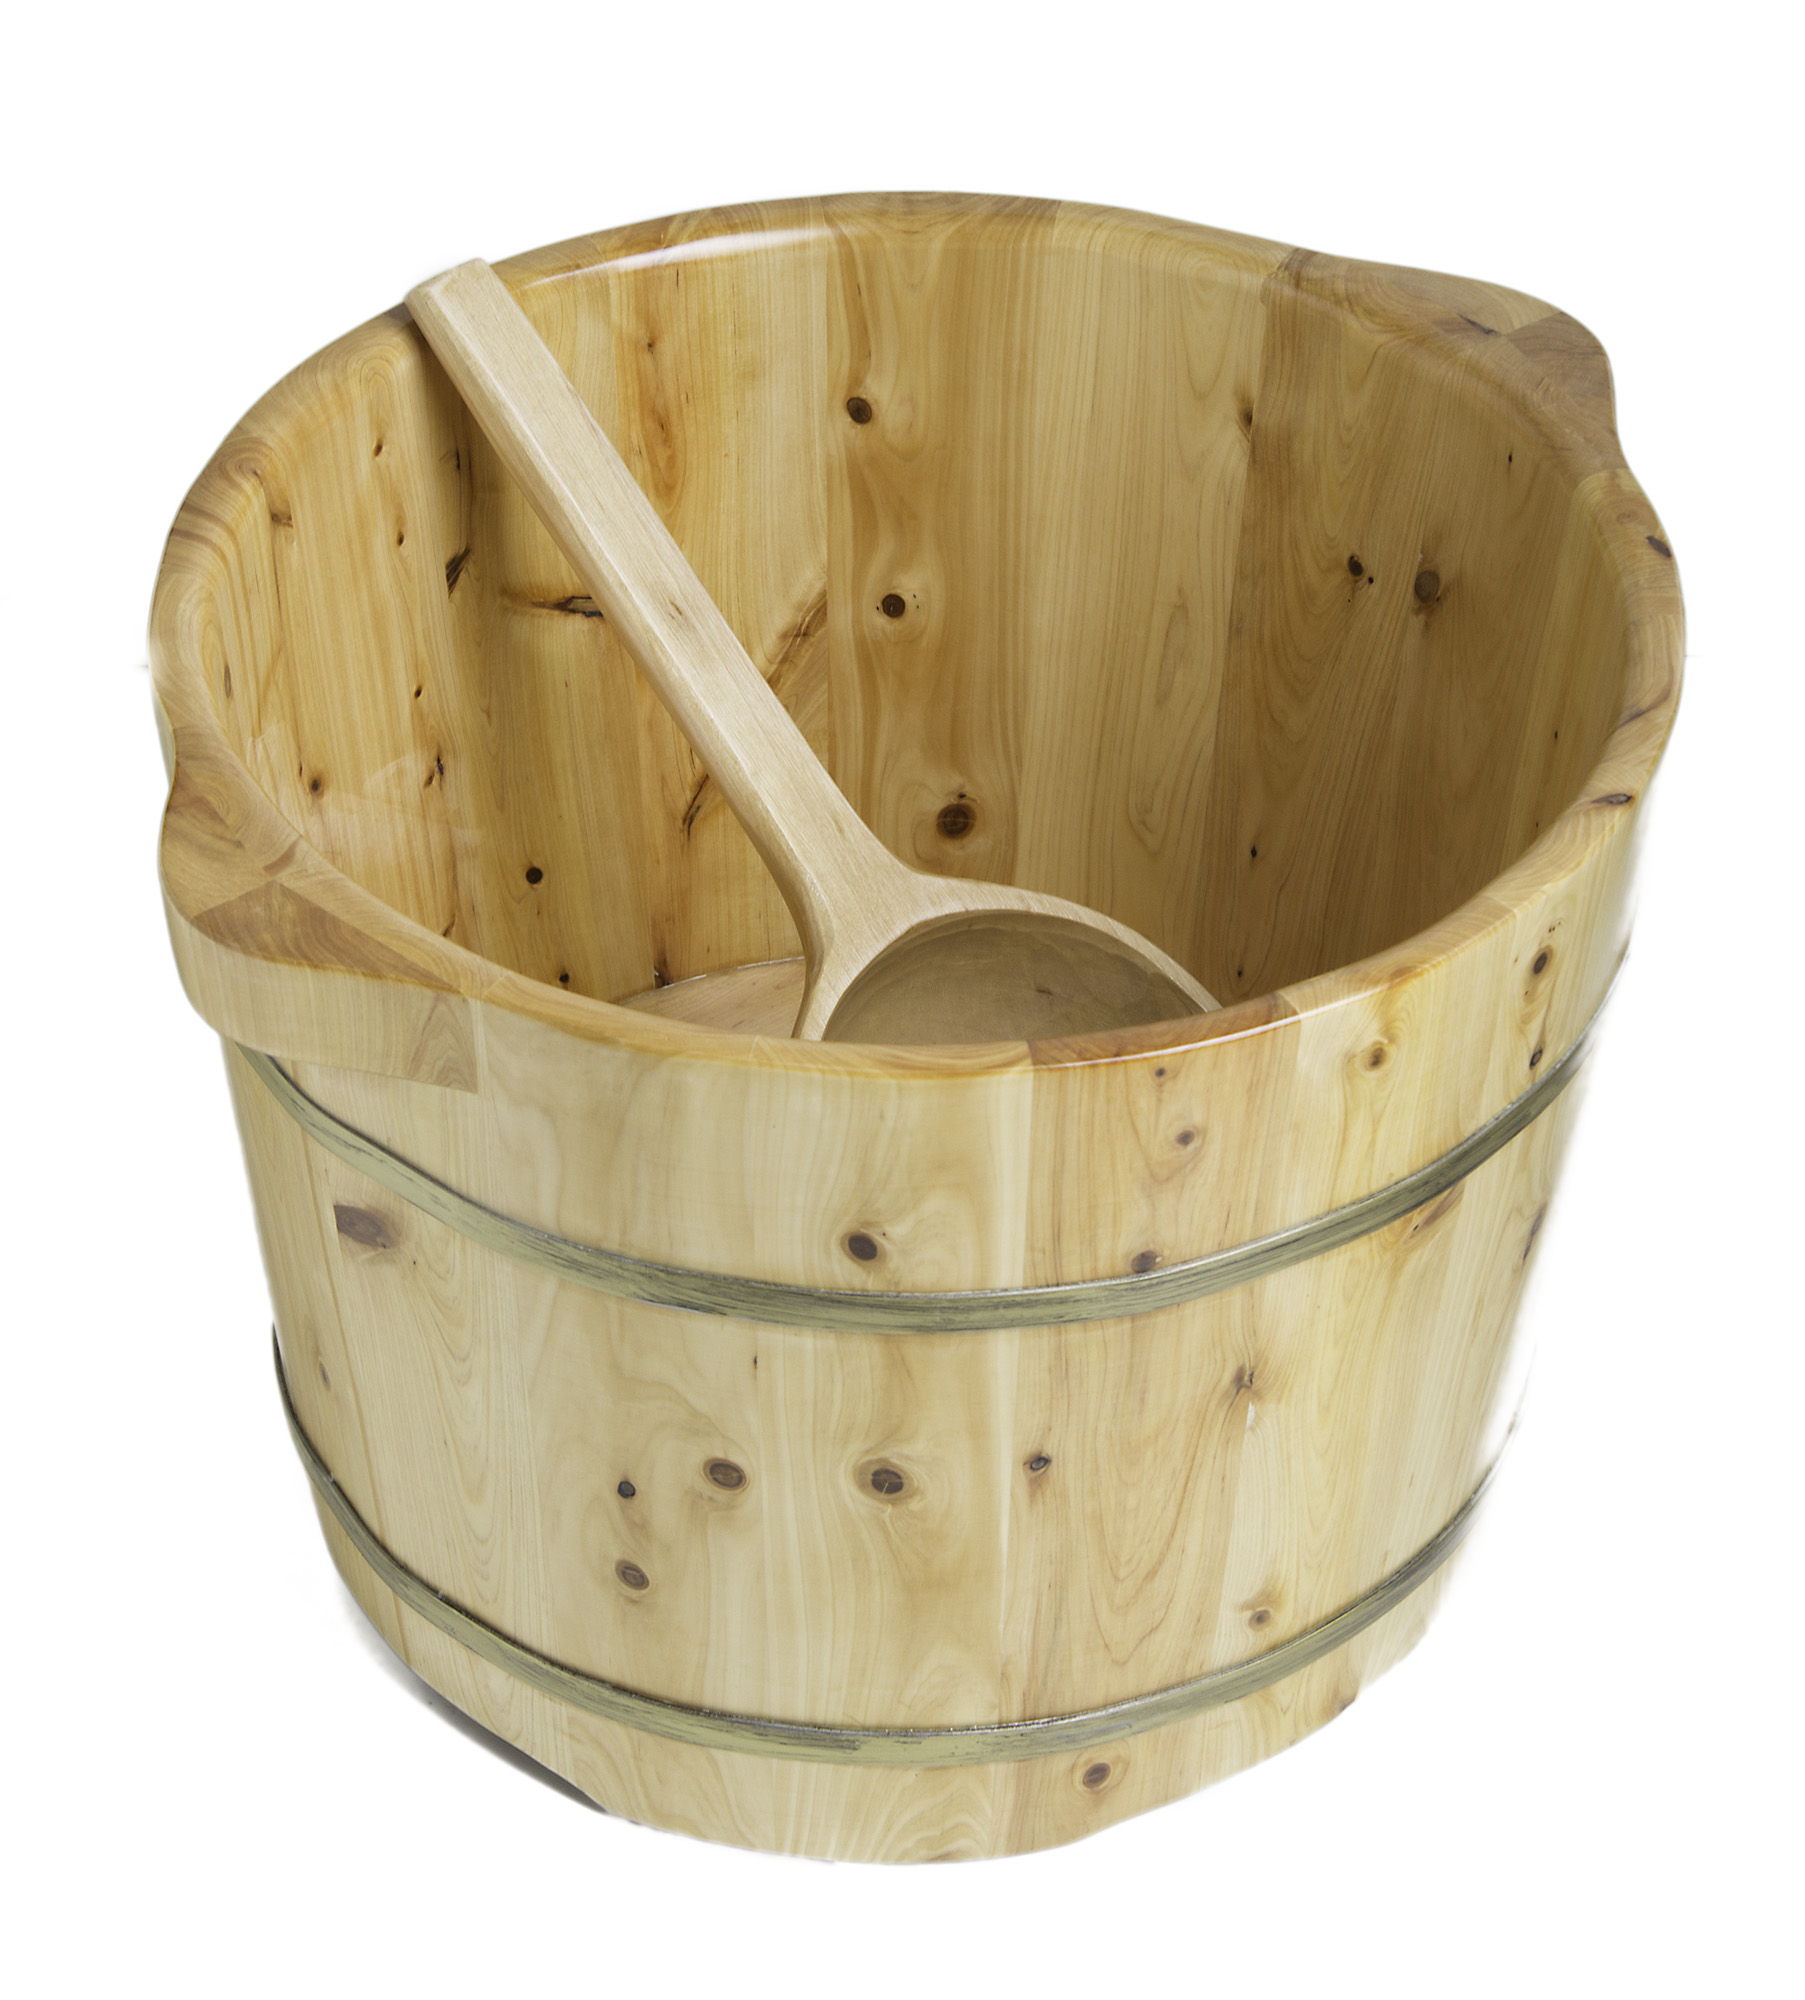 Picture of ALFI brand AB6604 15 in. Solid Cedar Wood Foot Soaking Barrel Bucket with Matching Spoon - Natural Wood